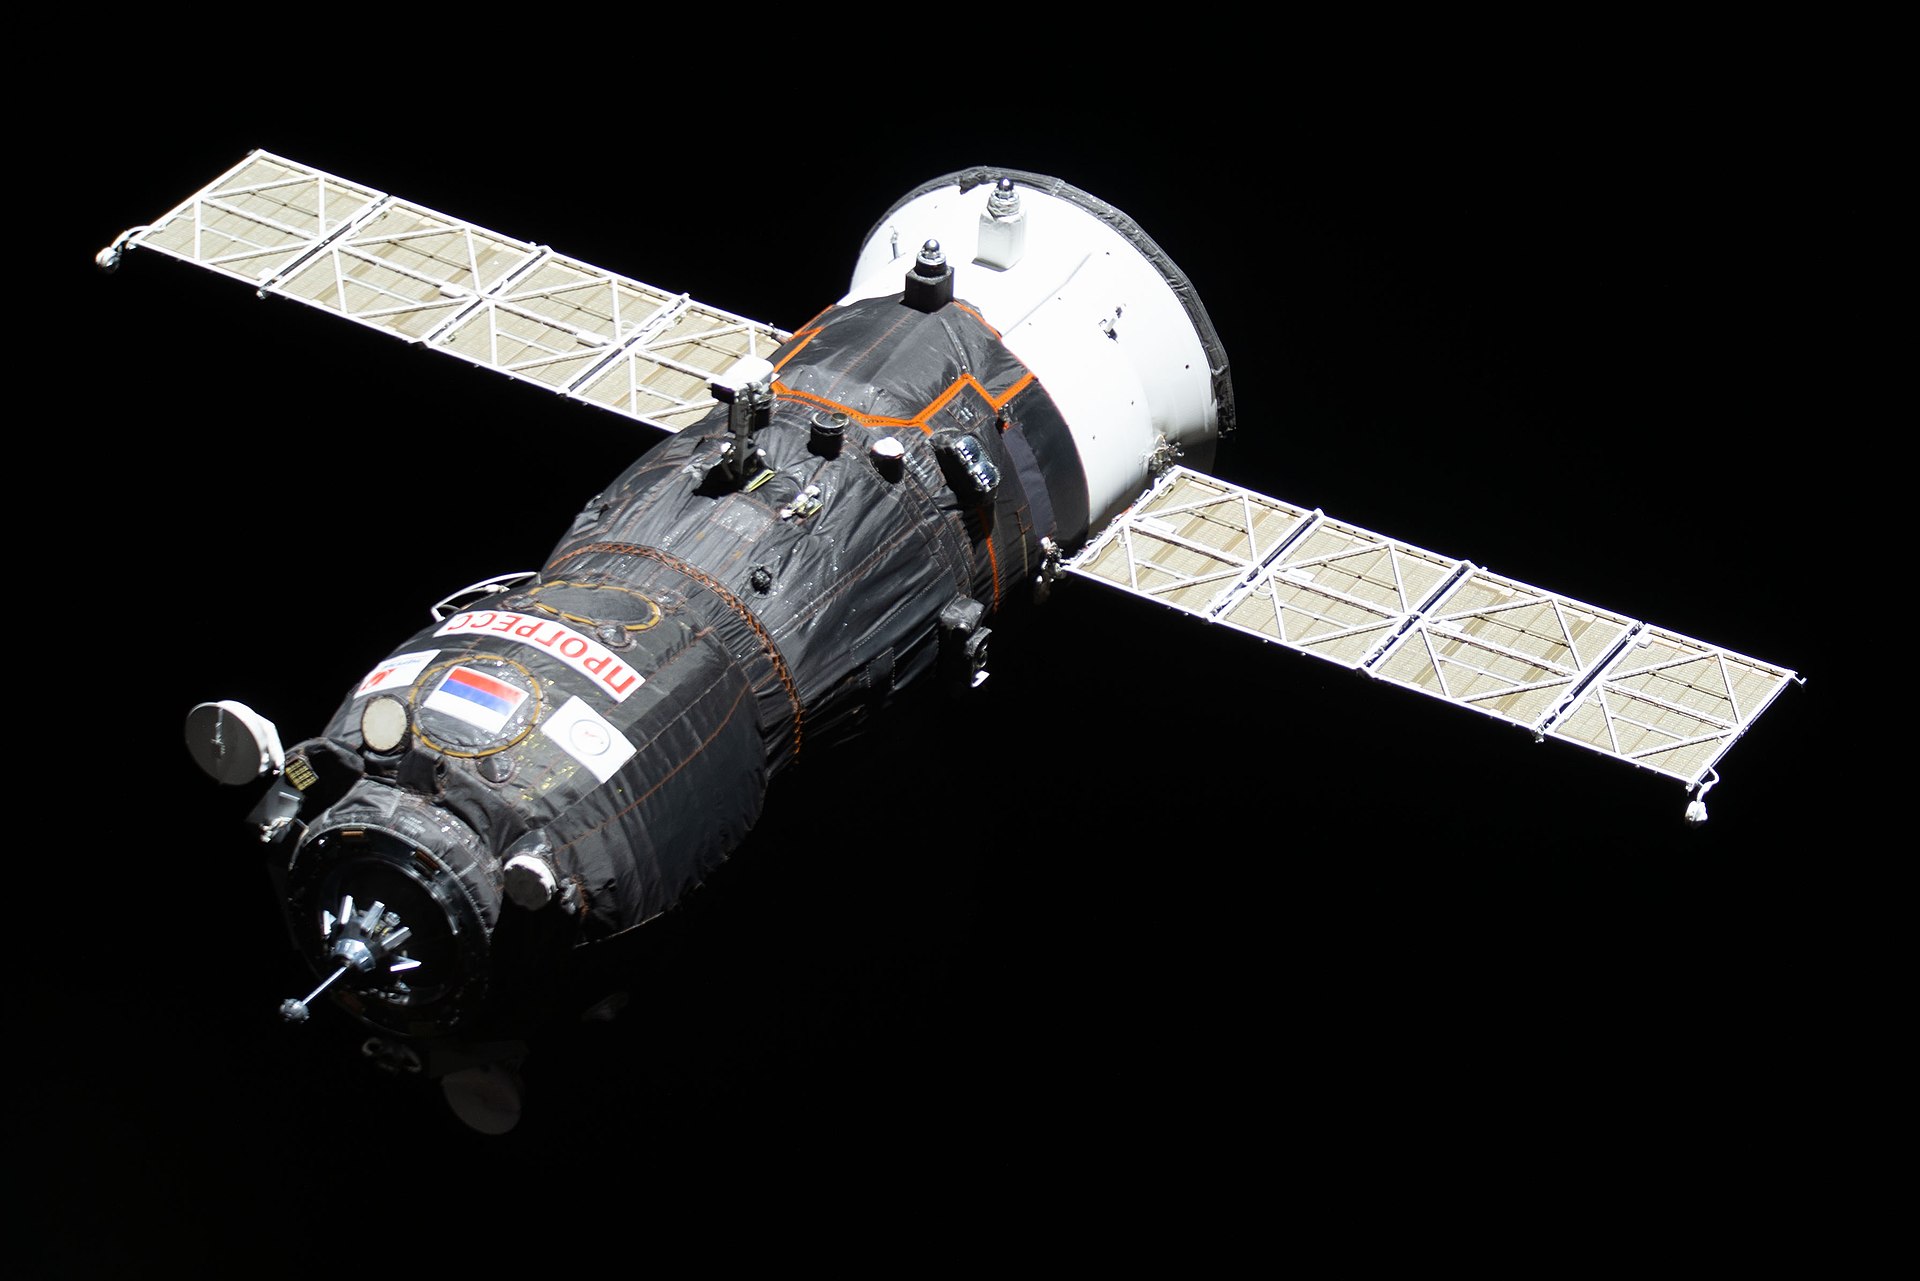 Progress MS-11 (72P) approaching the ISS Pirs node during Expedition 59